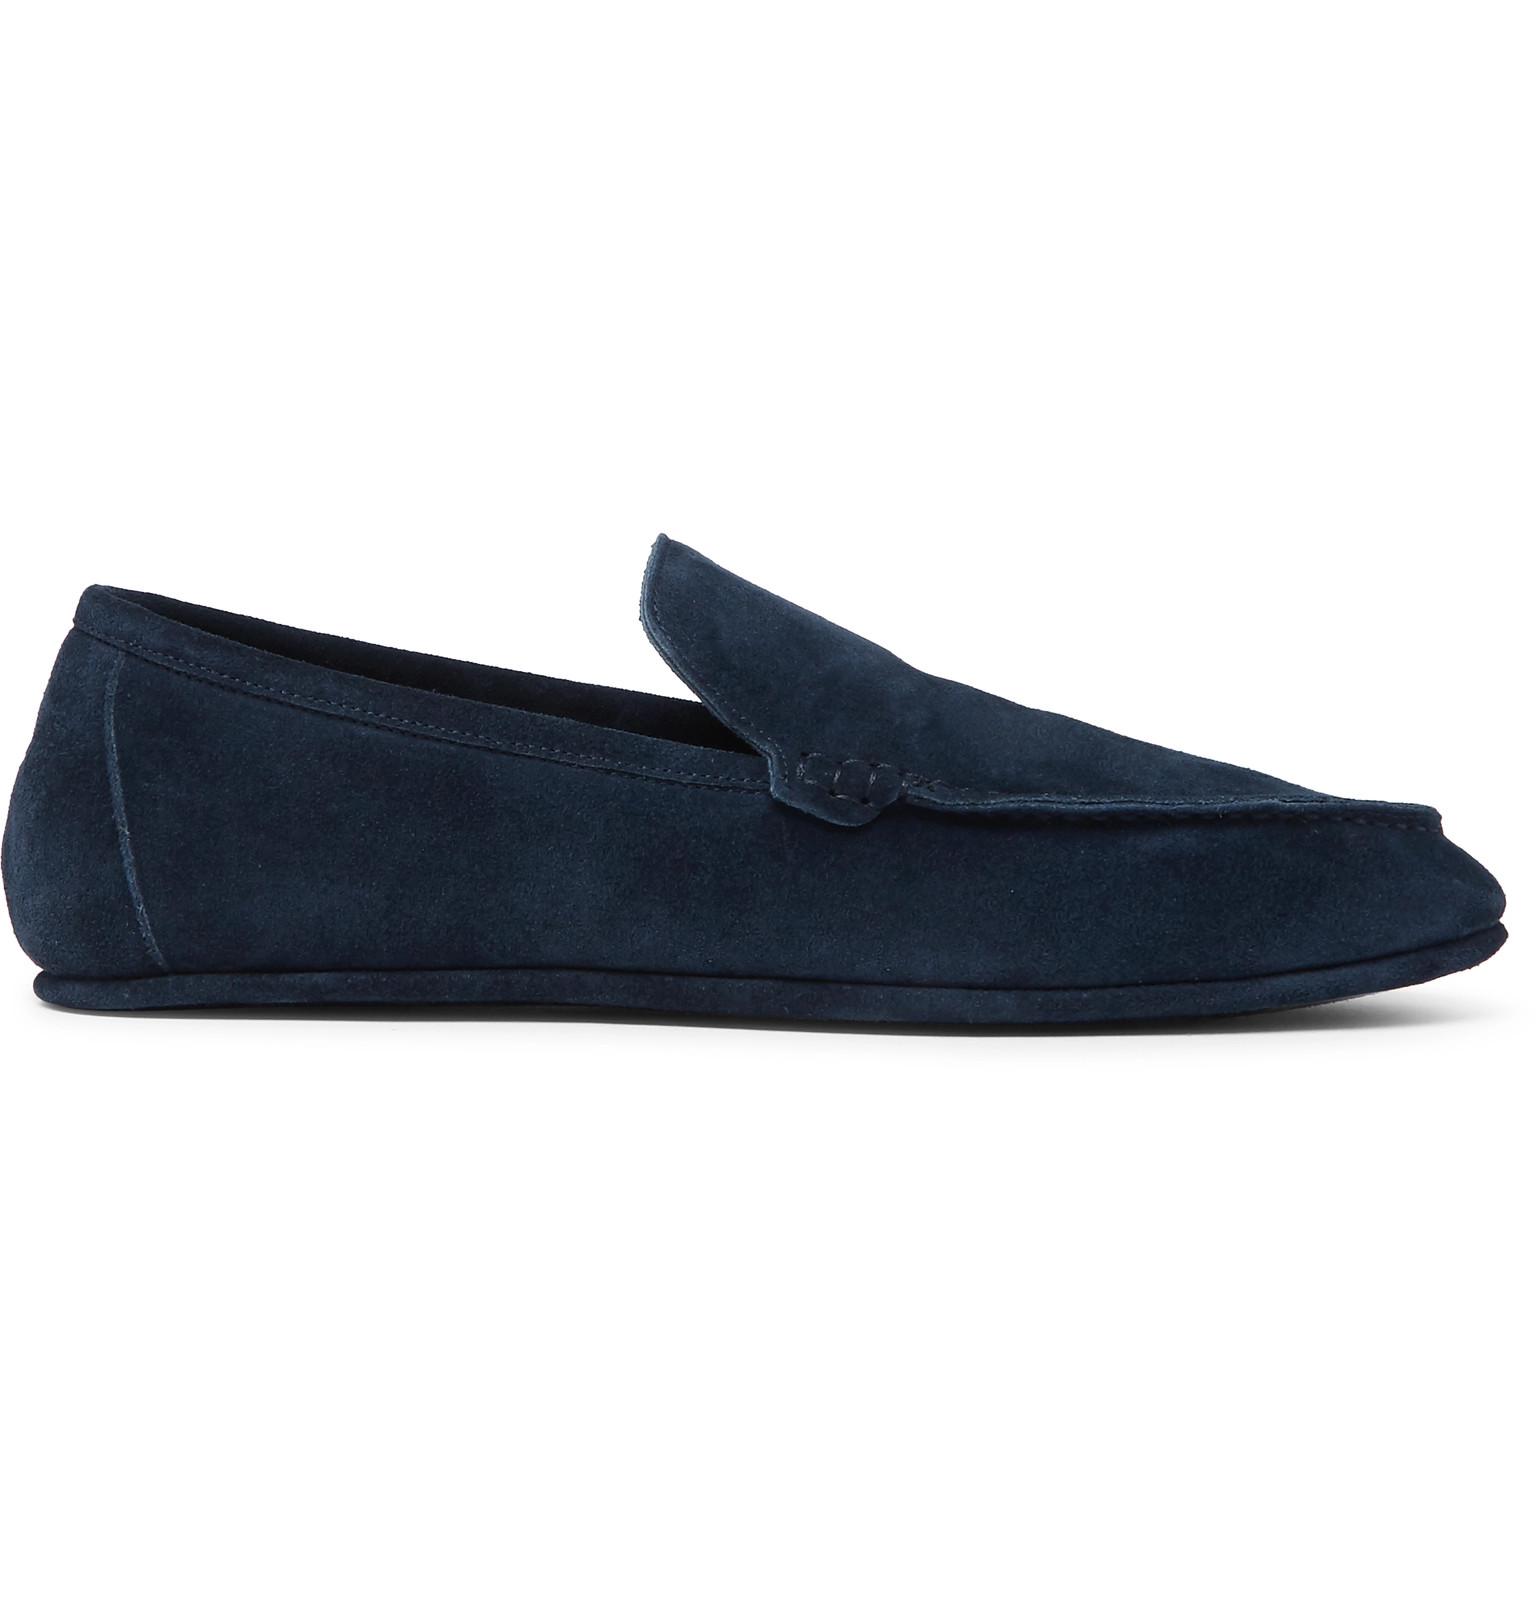 Loro Piana Walk At Home Cashmere-lined Suede Slippers in Navy (Blue ...